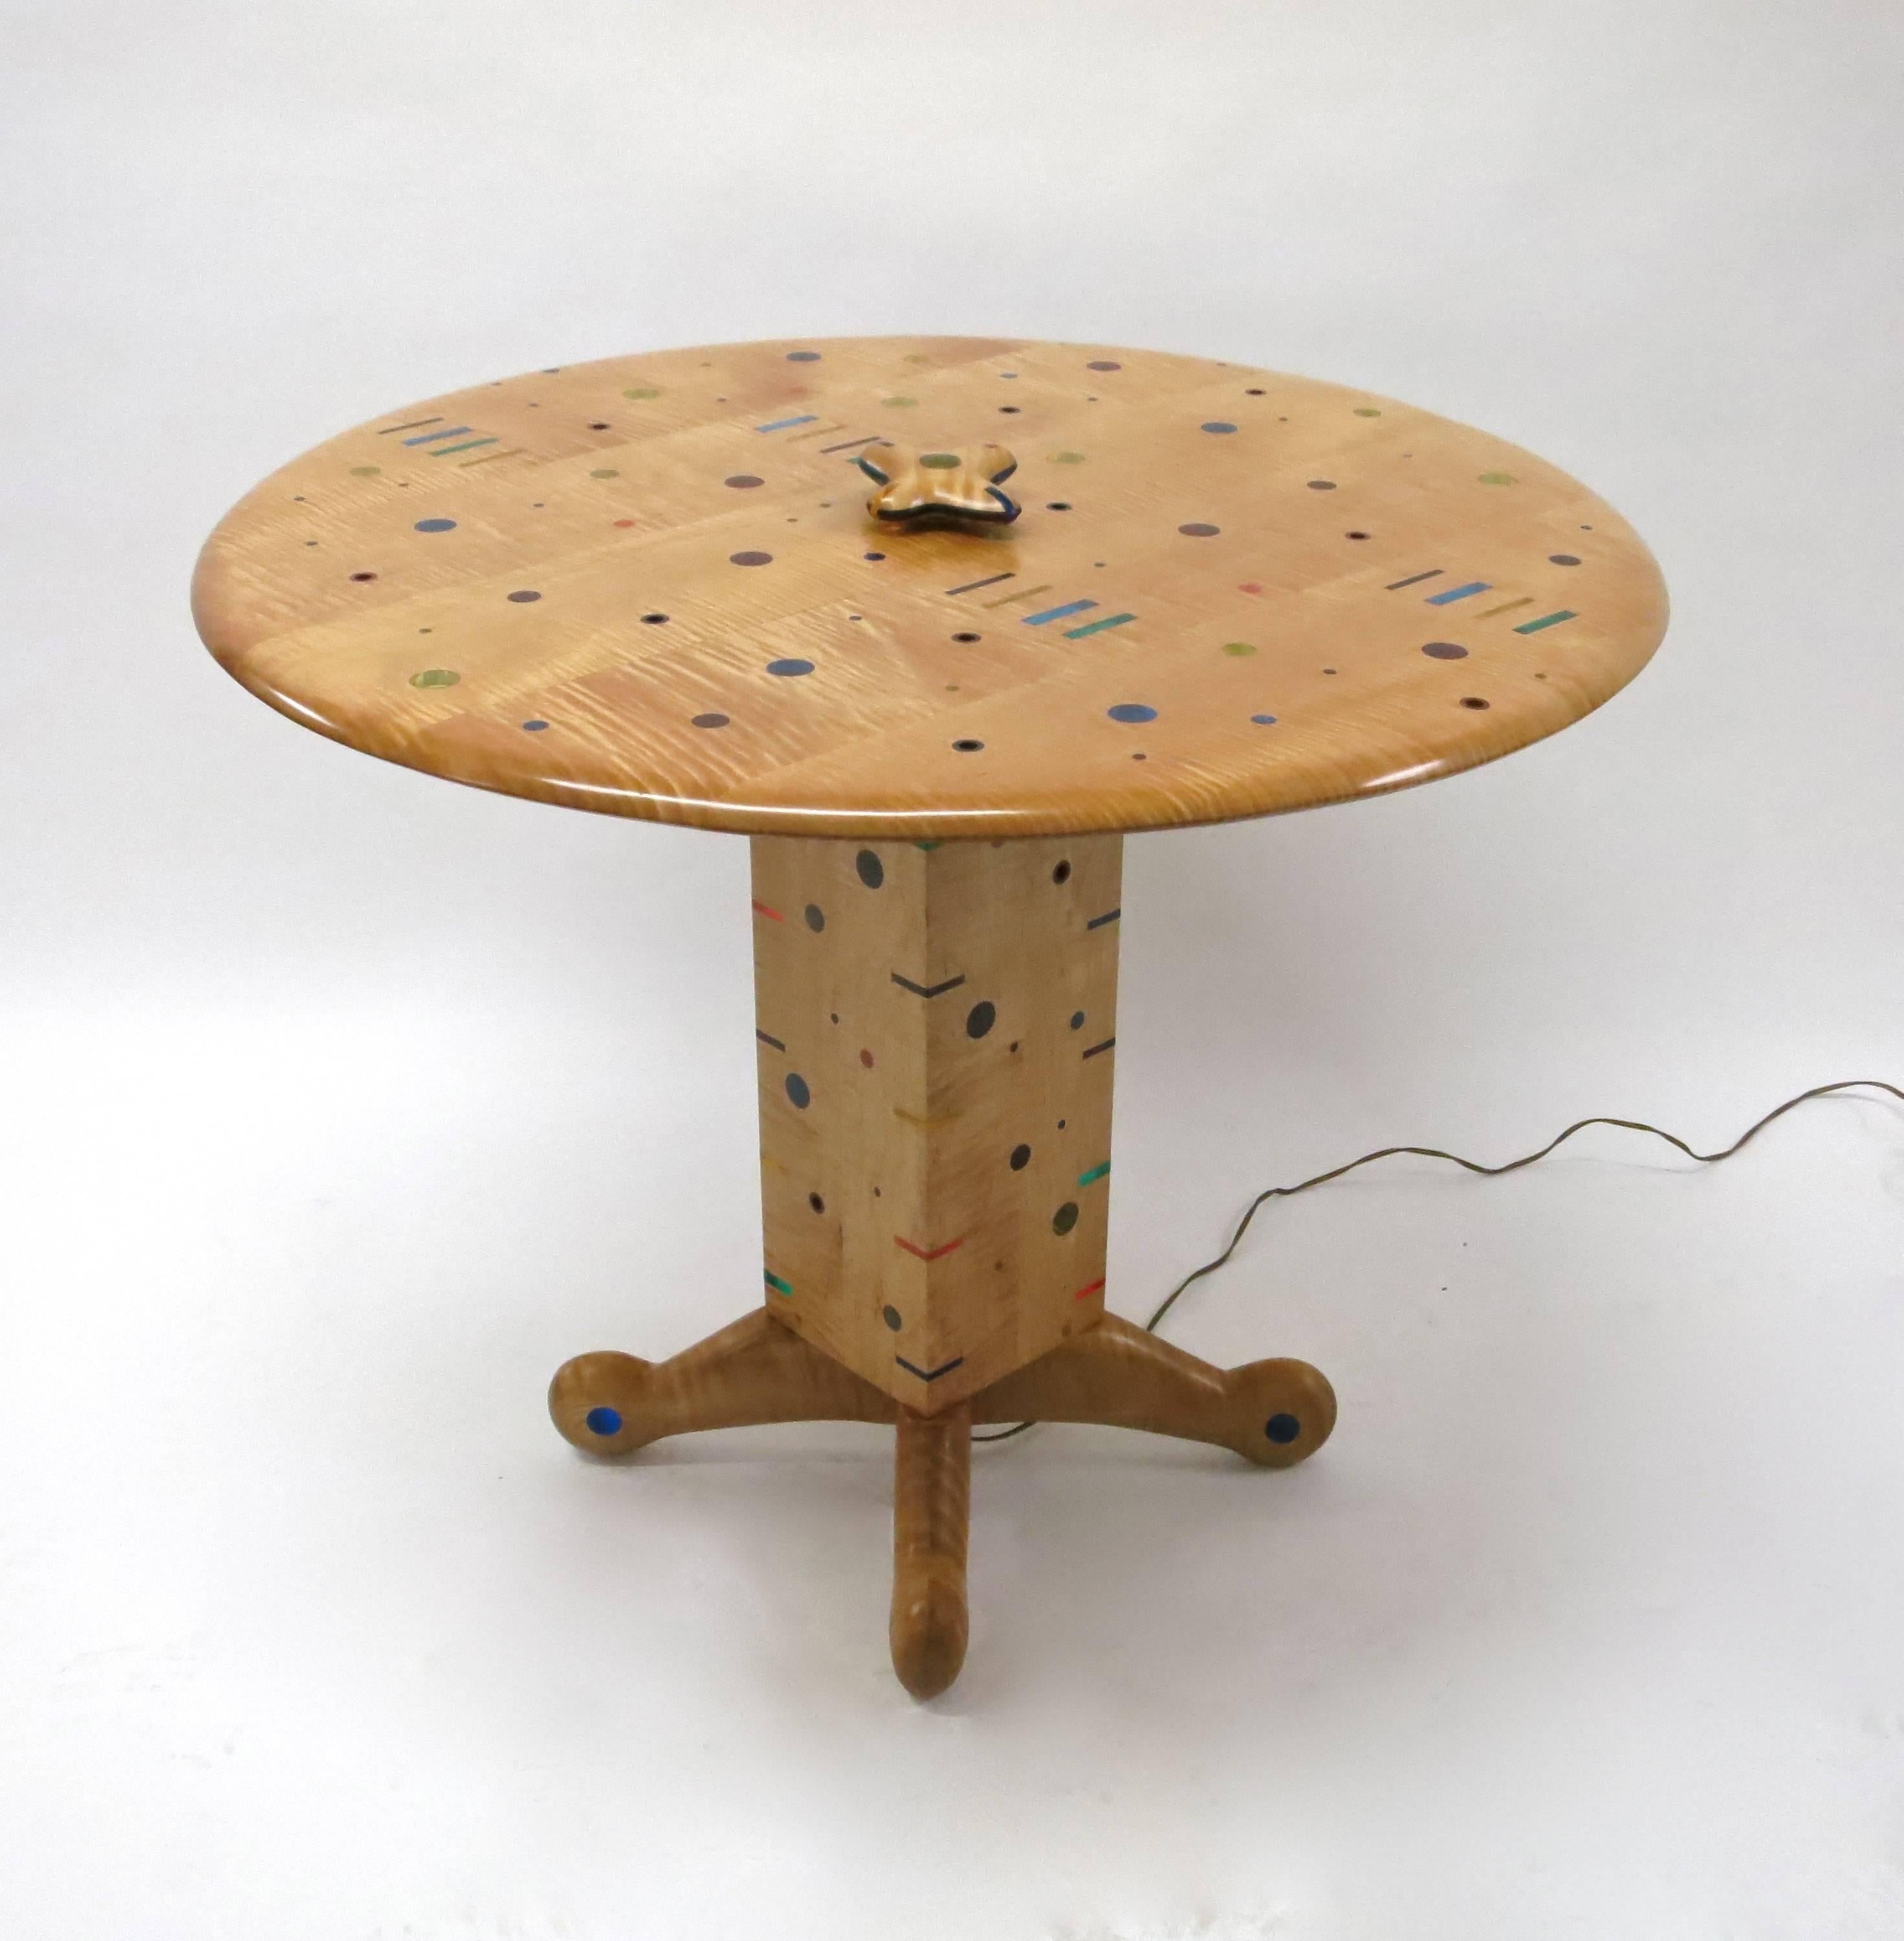 Dining or center table in excellent condition by Daniel Peters commissioned in mid 90's and completed in 1999 for the previous owner.
The table is made of curly maple wood with colored acrylic accents in shapes of full circles, hollow circles, and